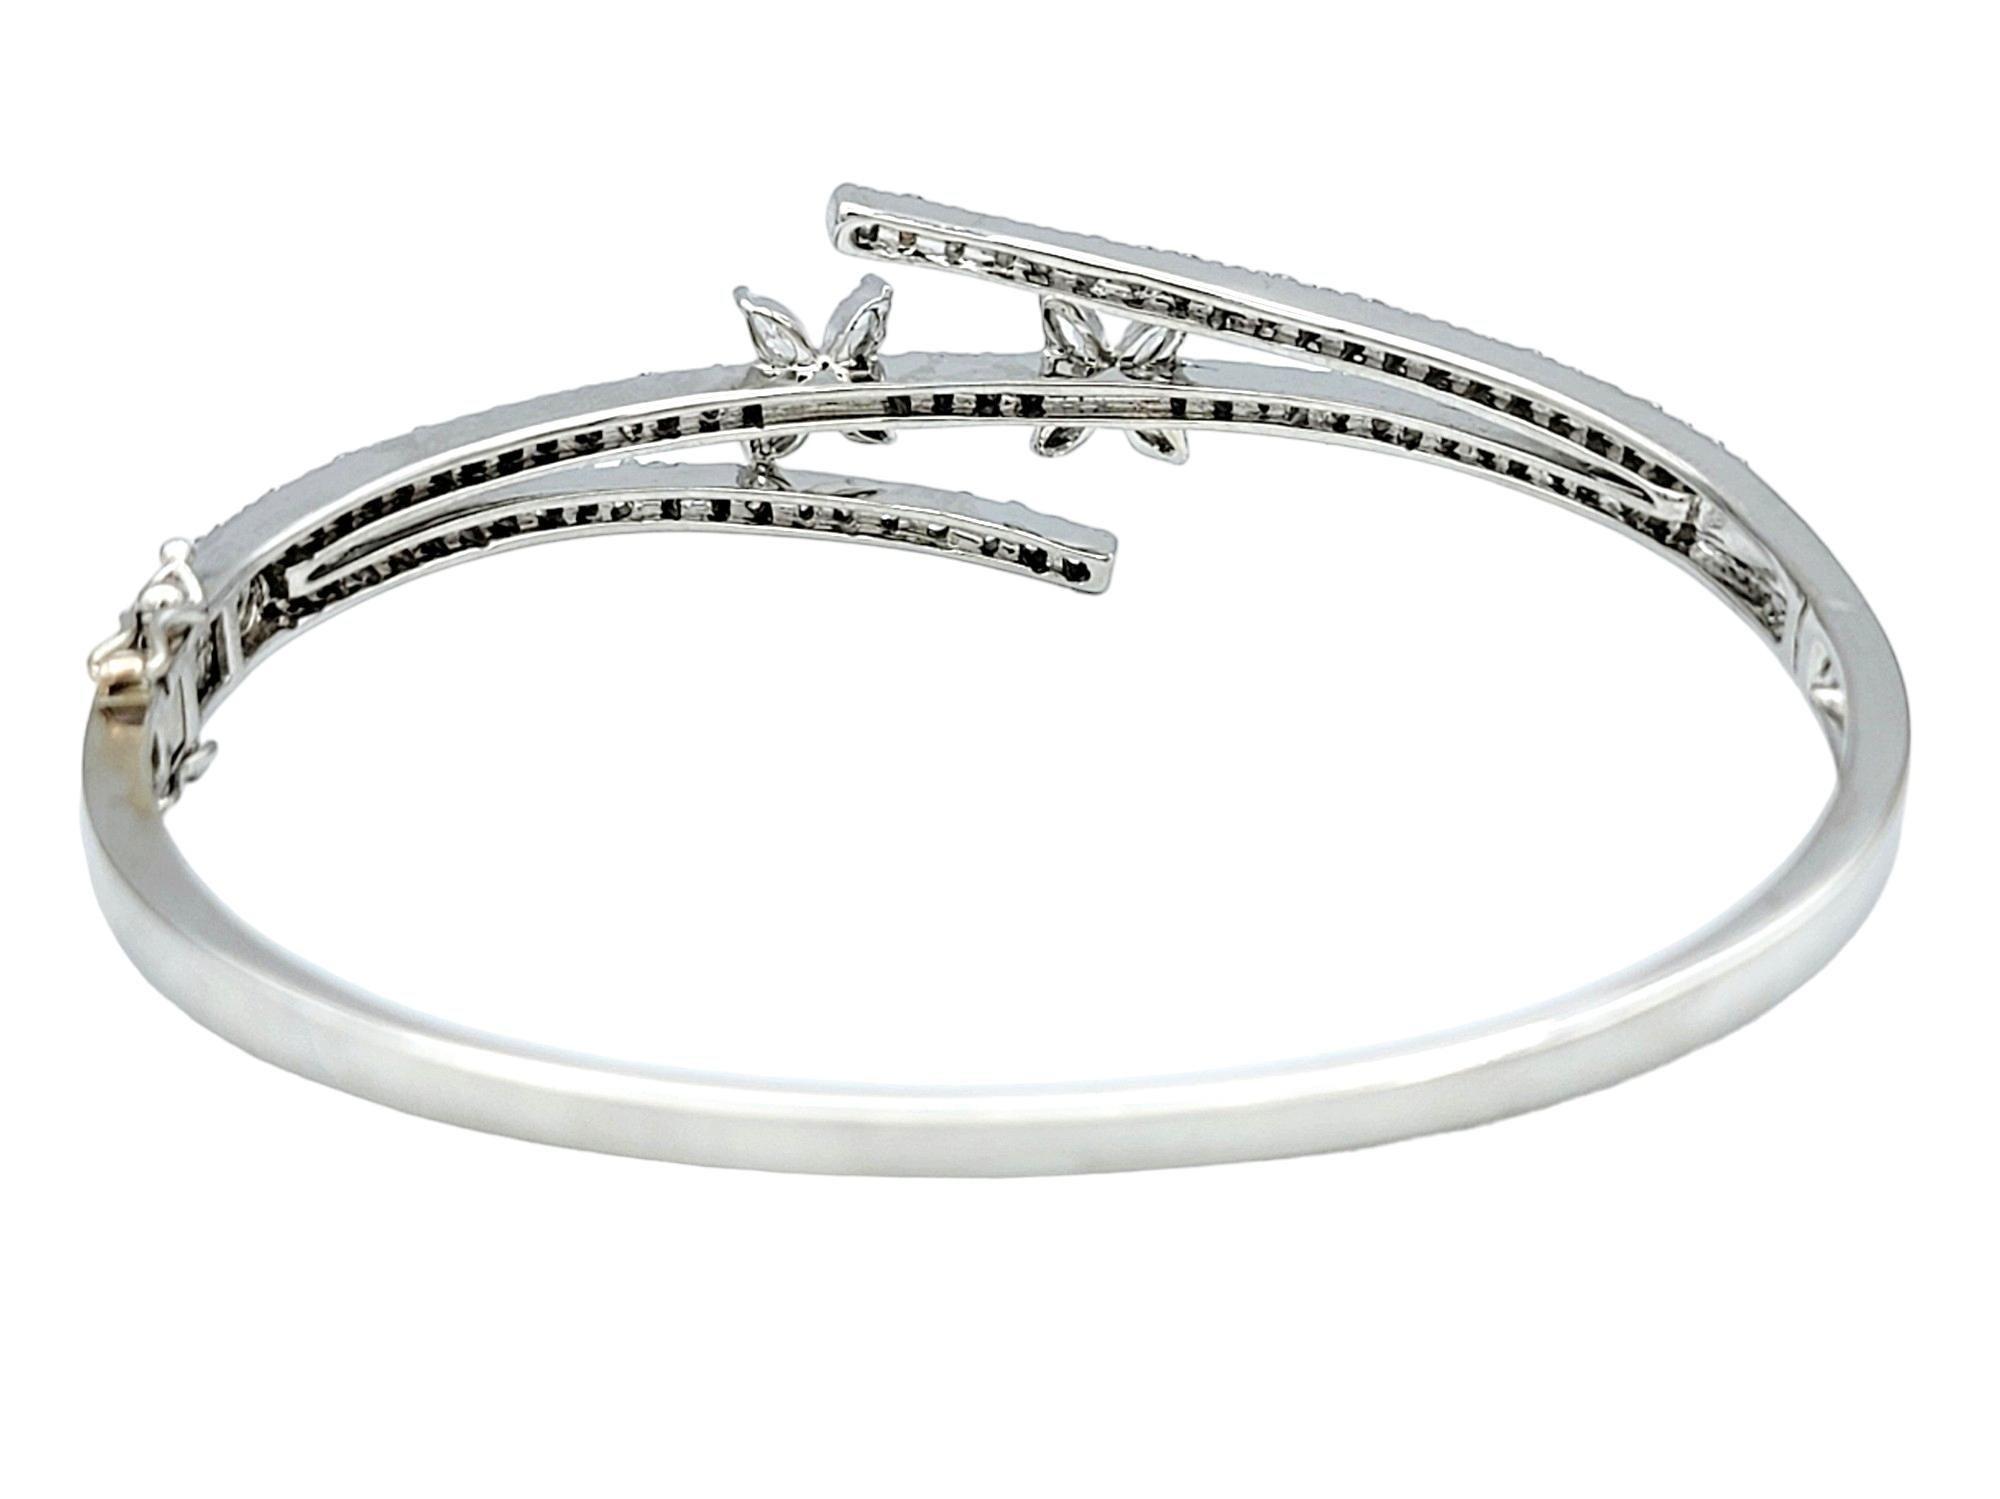 Contemporary Round Diamond Floral Bypass Style Bangle Bracelet Set in 18 Karat White Gold For Sale